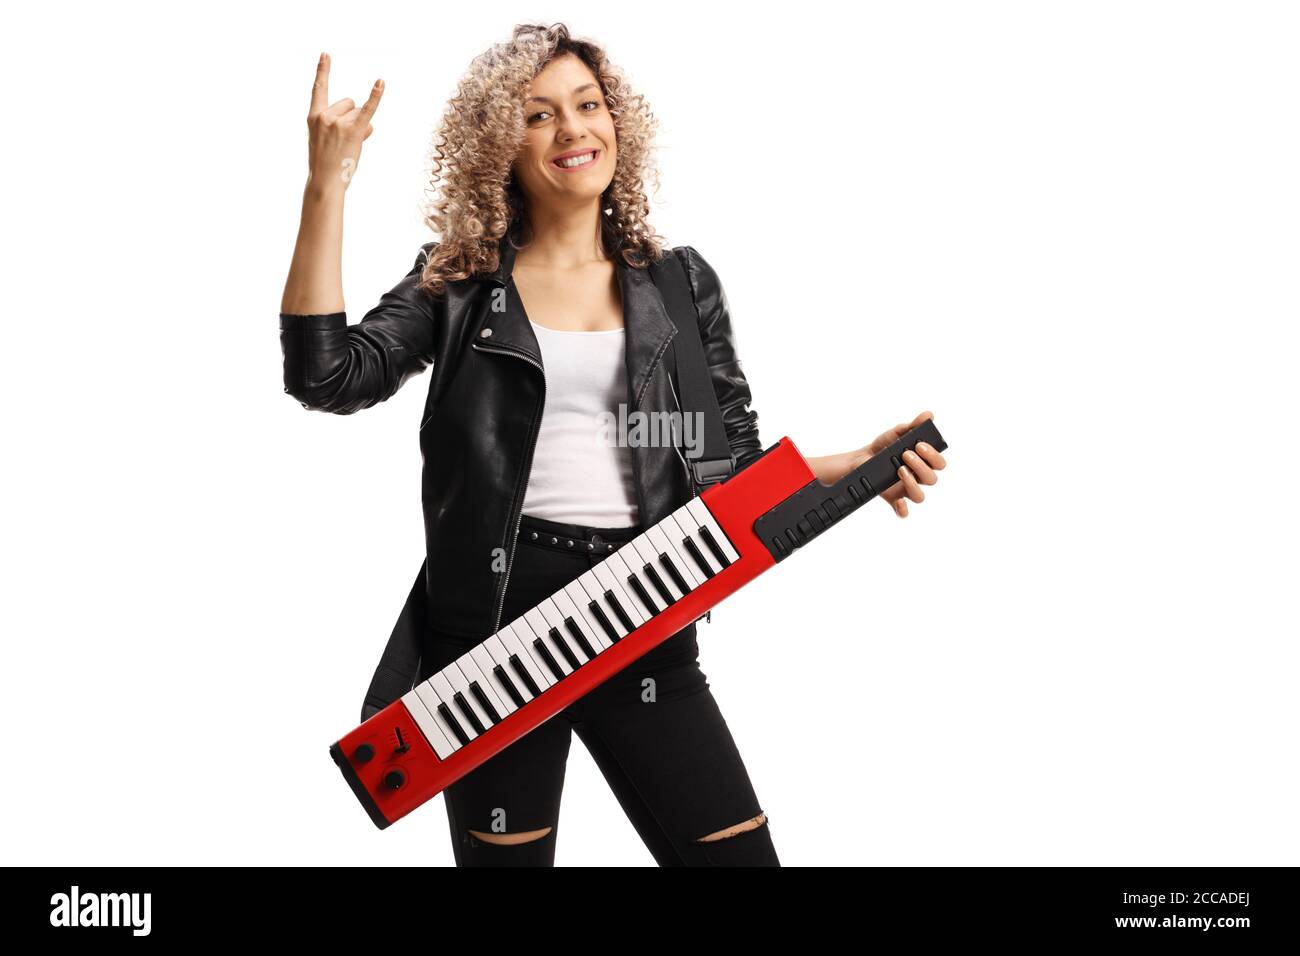 Female musician with a curly blond hair with a keytar synthesizer gesturing rock and roll sign isolated on white background Stock Photo